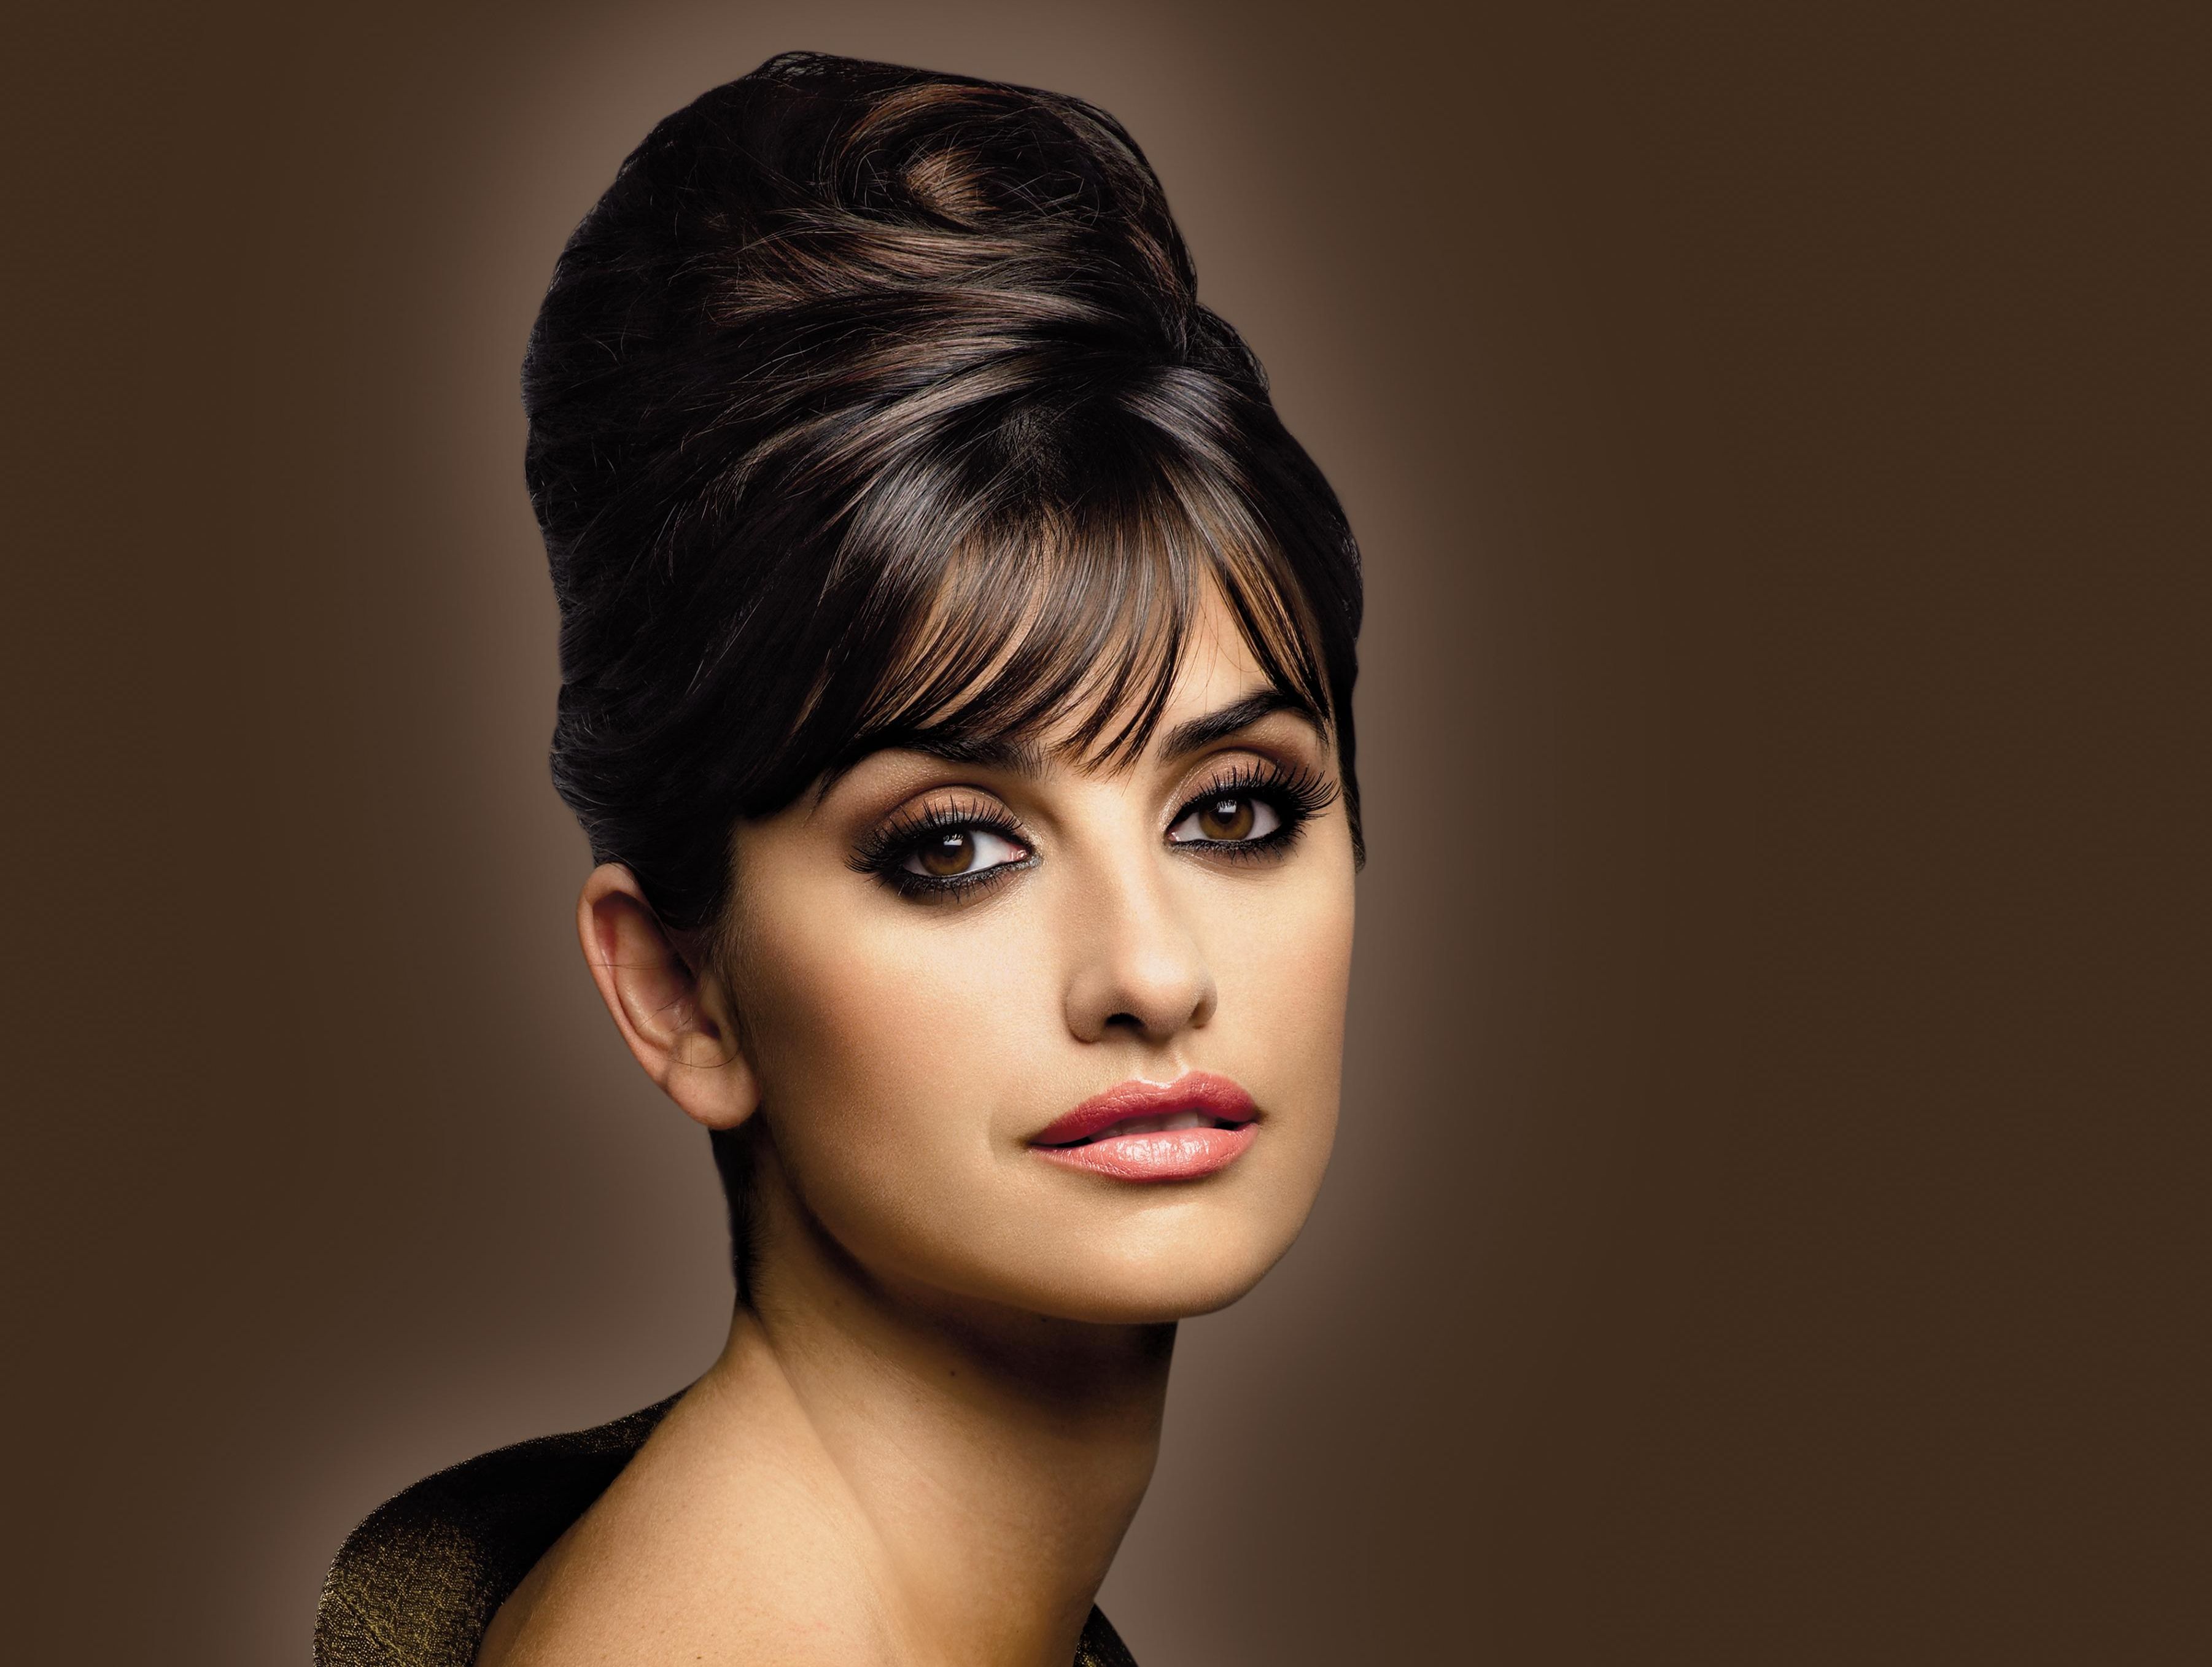 100+ Penelope Cruz HD Wallpapers and Backgrounds